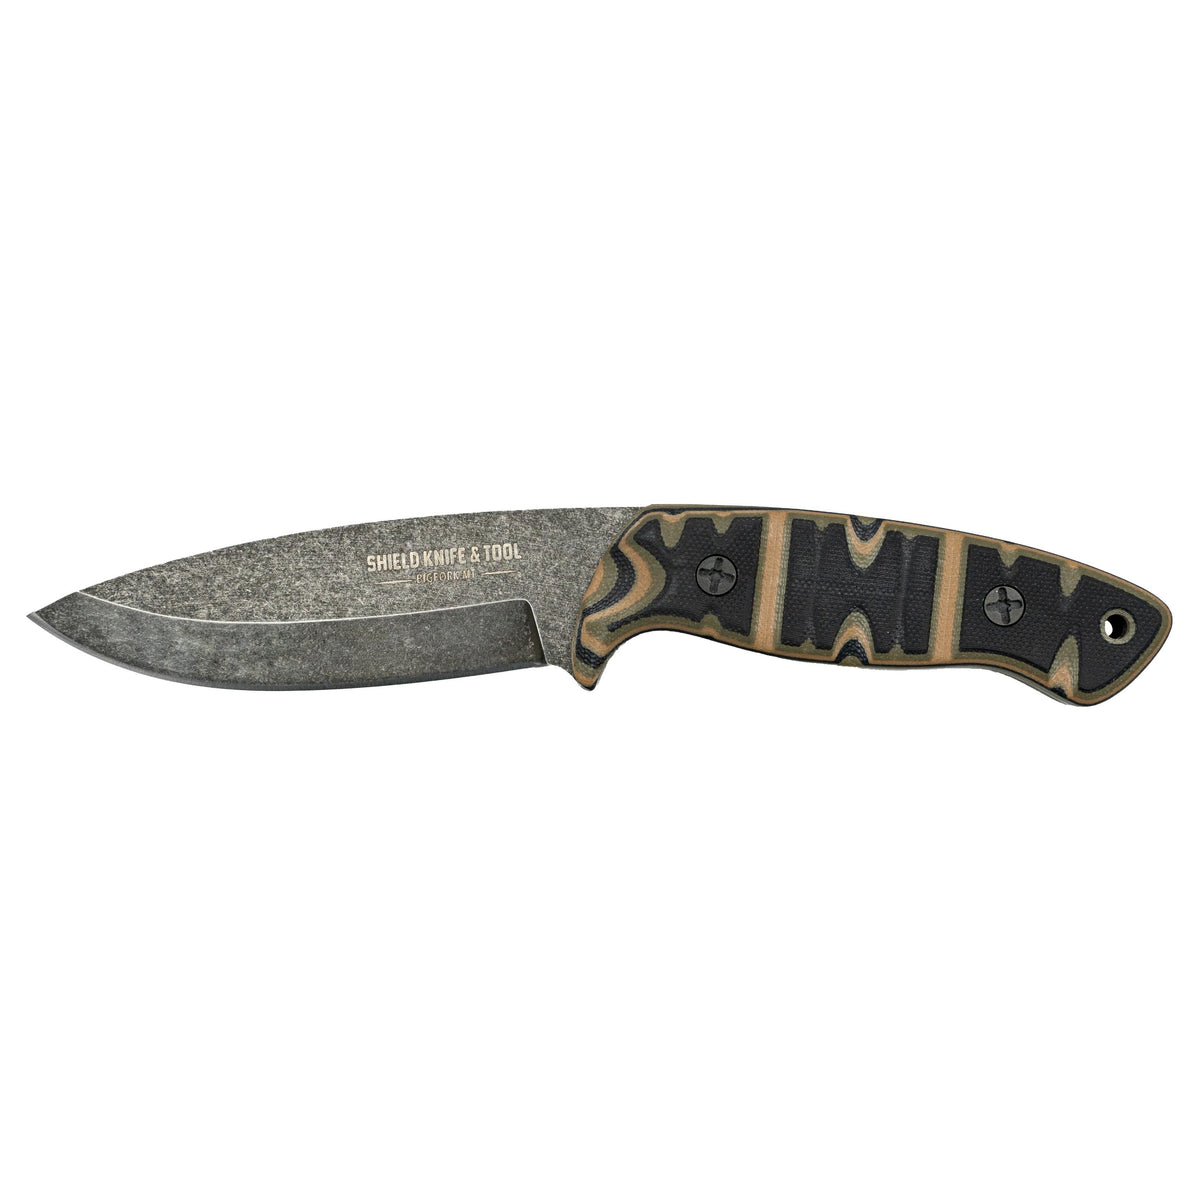 The Mission - Acid Stone Washed- Camo G10